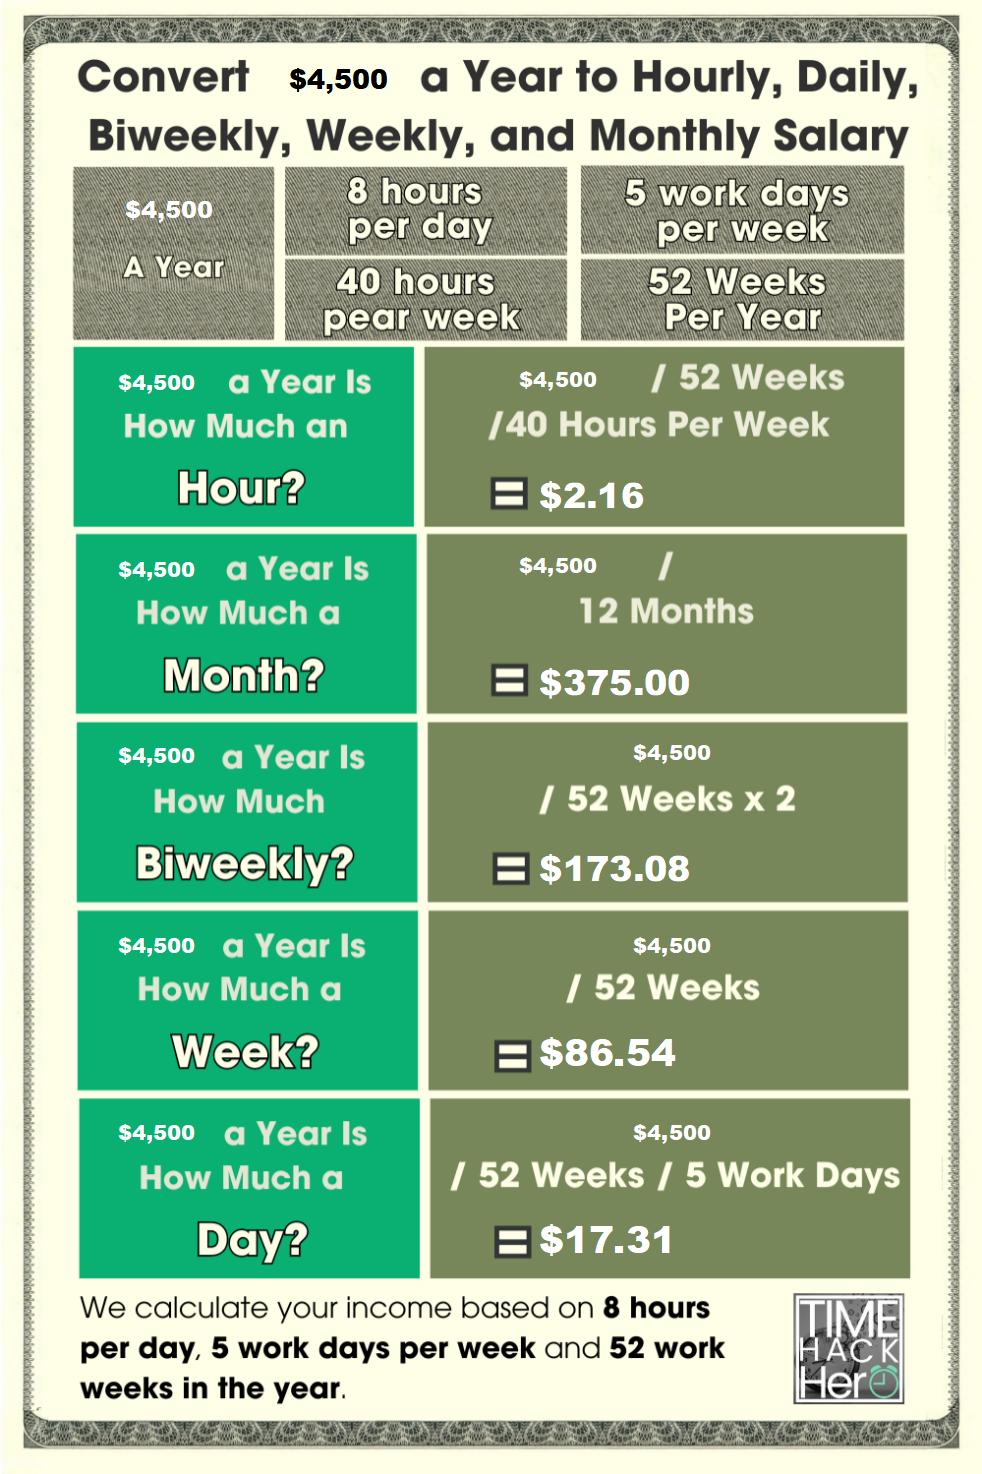 Convert $4500 a Year to Hourly, Daily, Biweekly, Weekly, and Monthly Salary